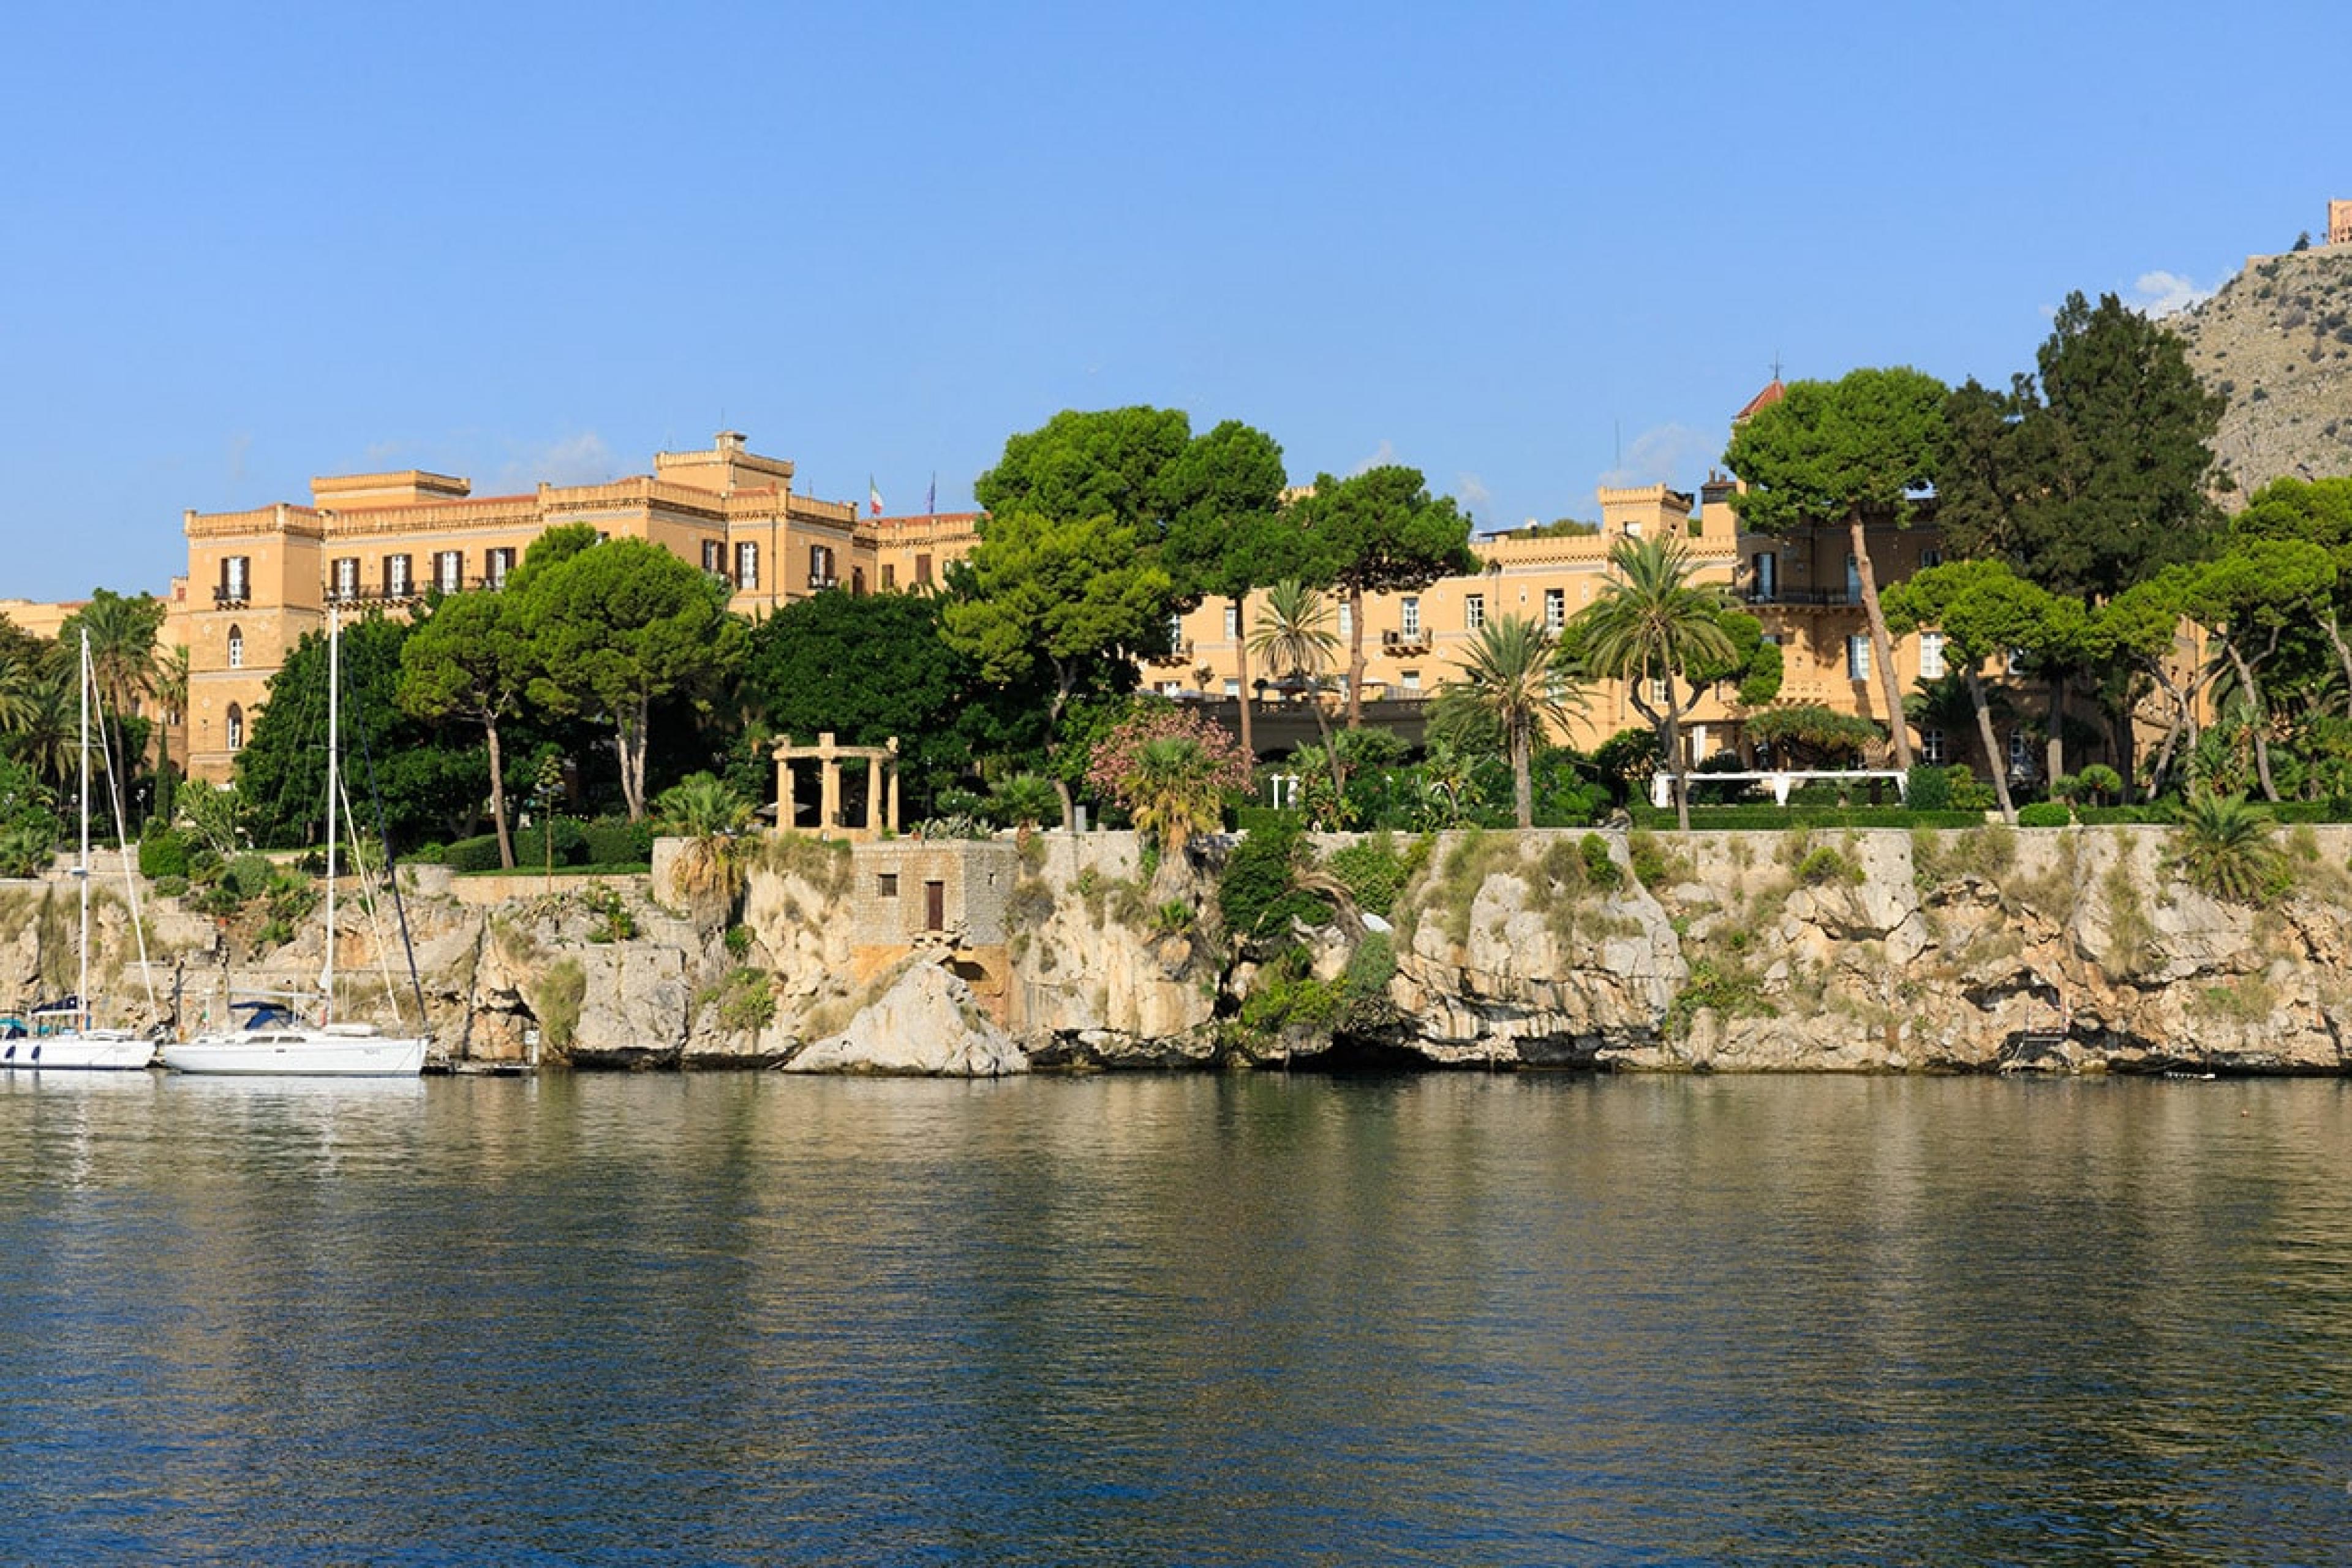 looking over water to italianate villa-style hotel buildings on a coastal cliff 